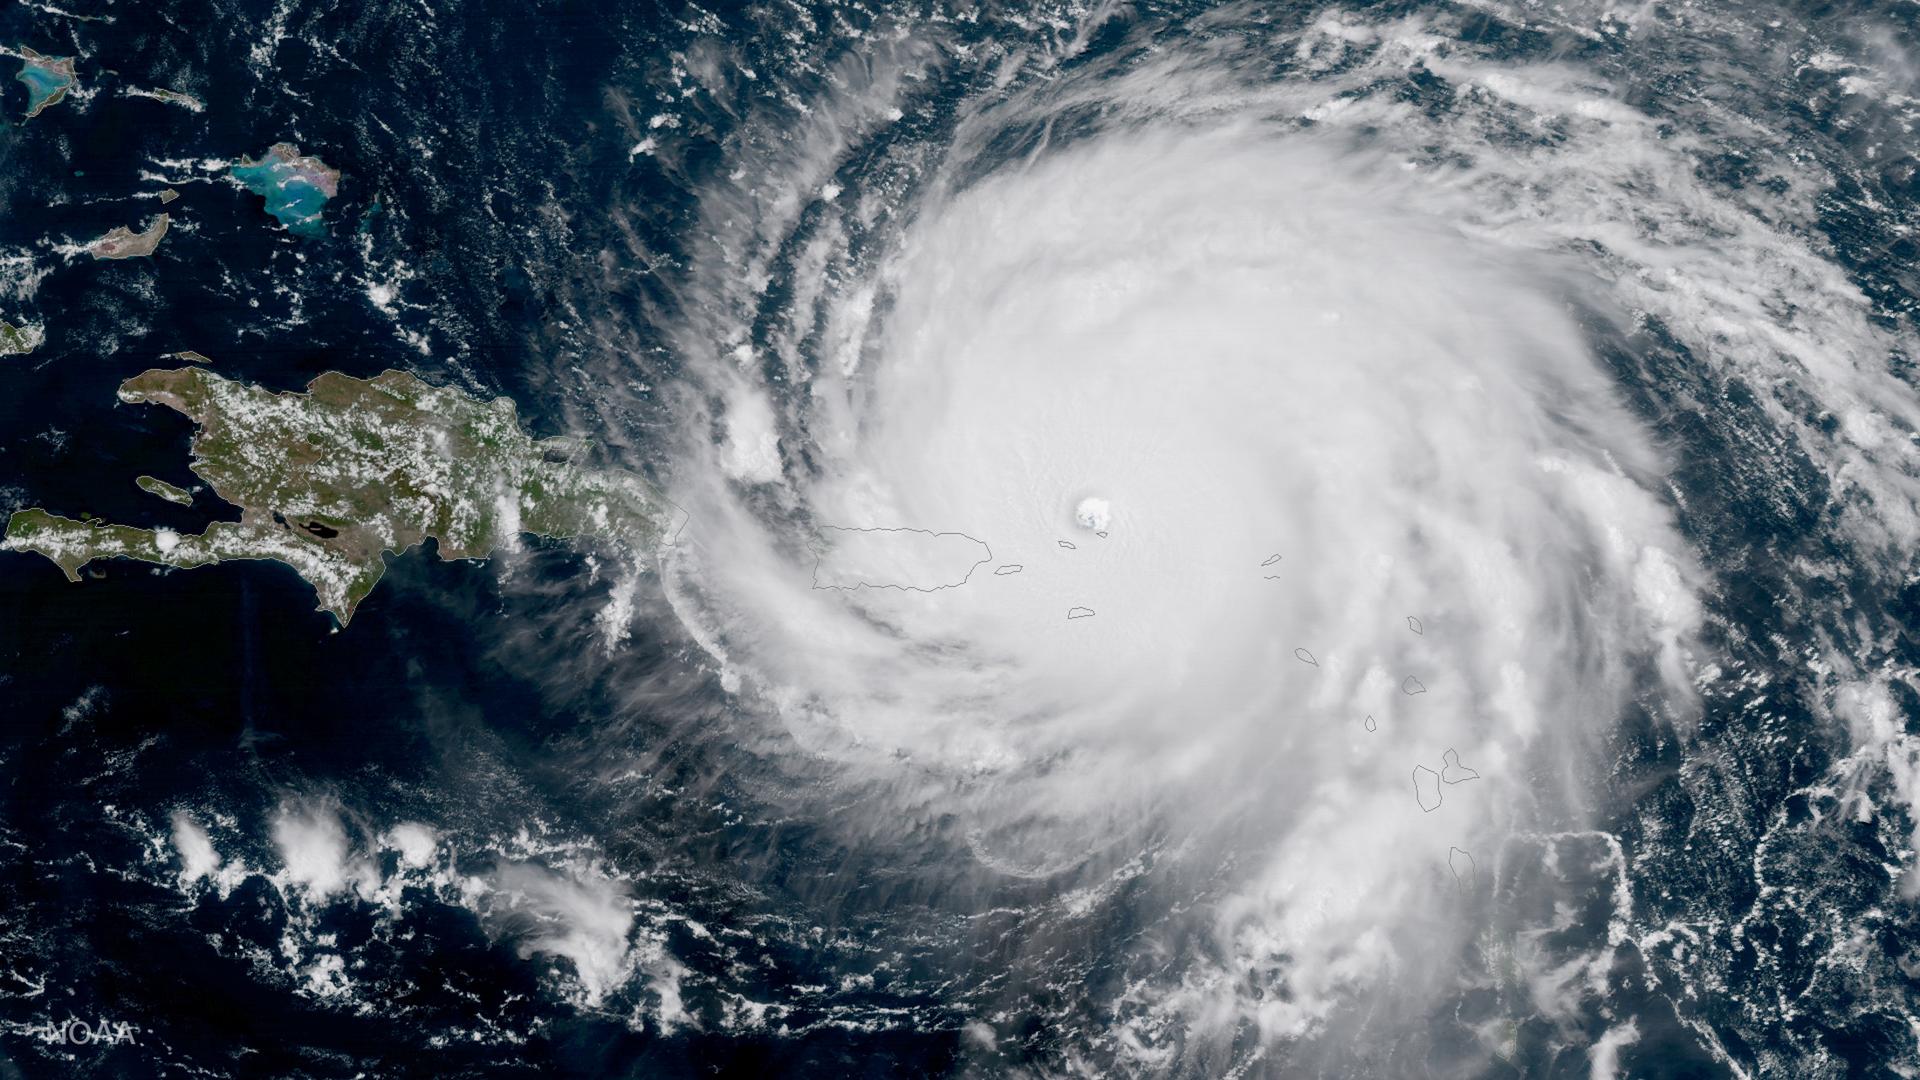 Hurricane Irma, a record Category 5 storm, passes over Barbuda and other Caribbean islands in this NOAA National Weather Service National Hurricane Center satellite image taken on September 6, 2017.